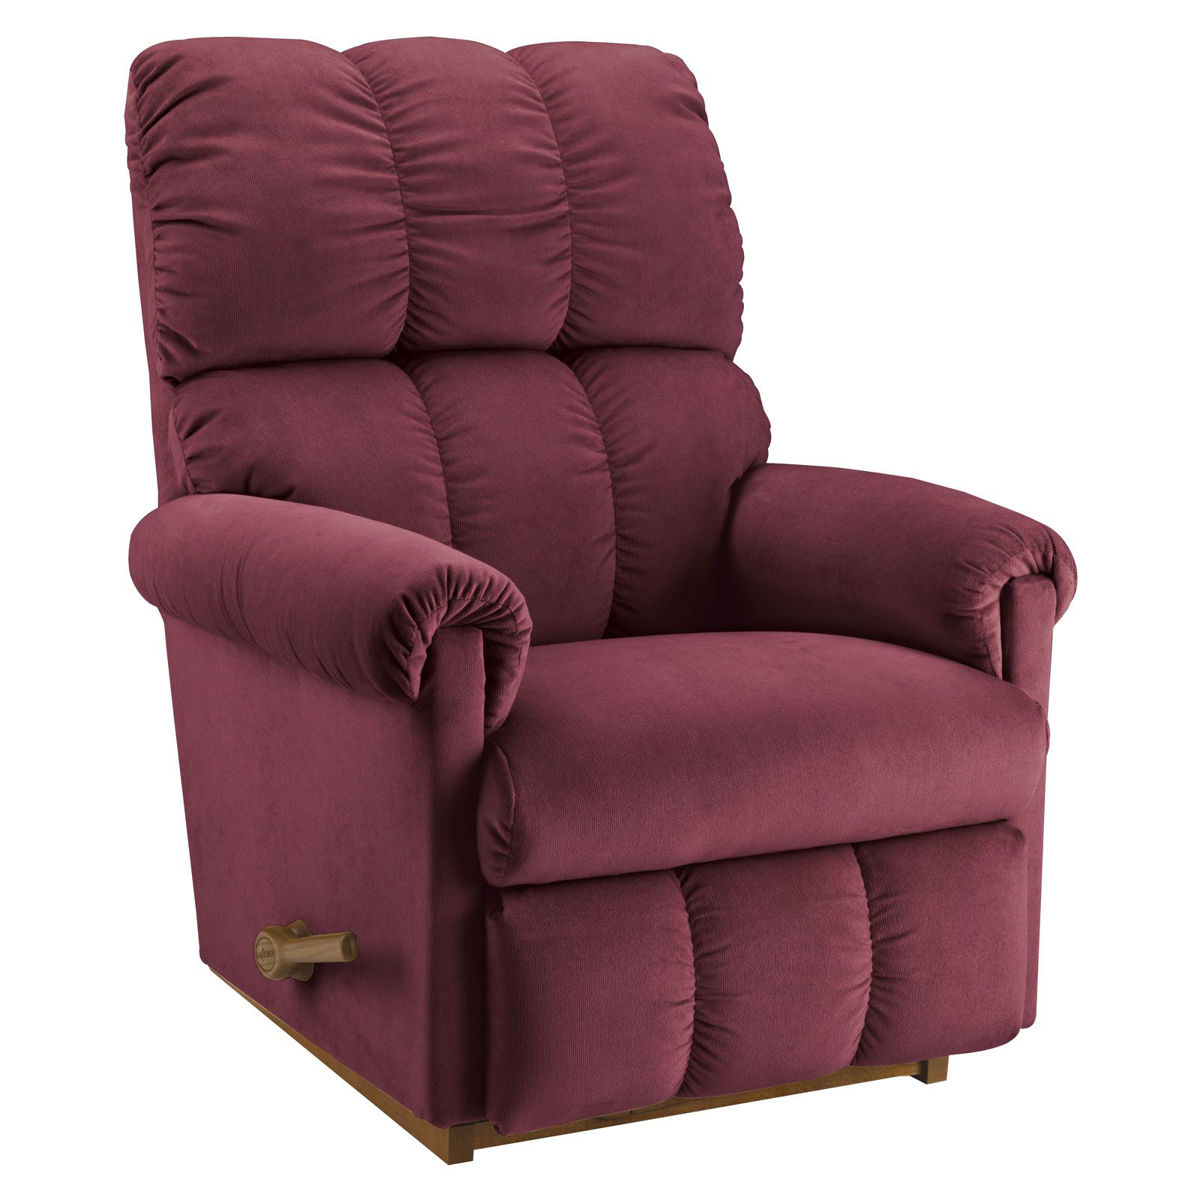 Picture of Vail Burgundy Rocker Recliner